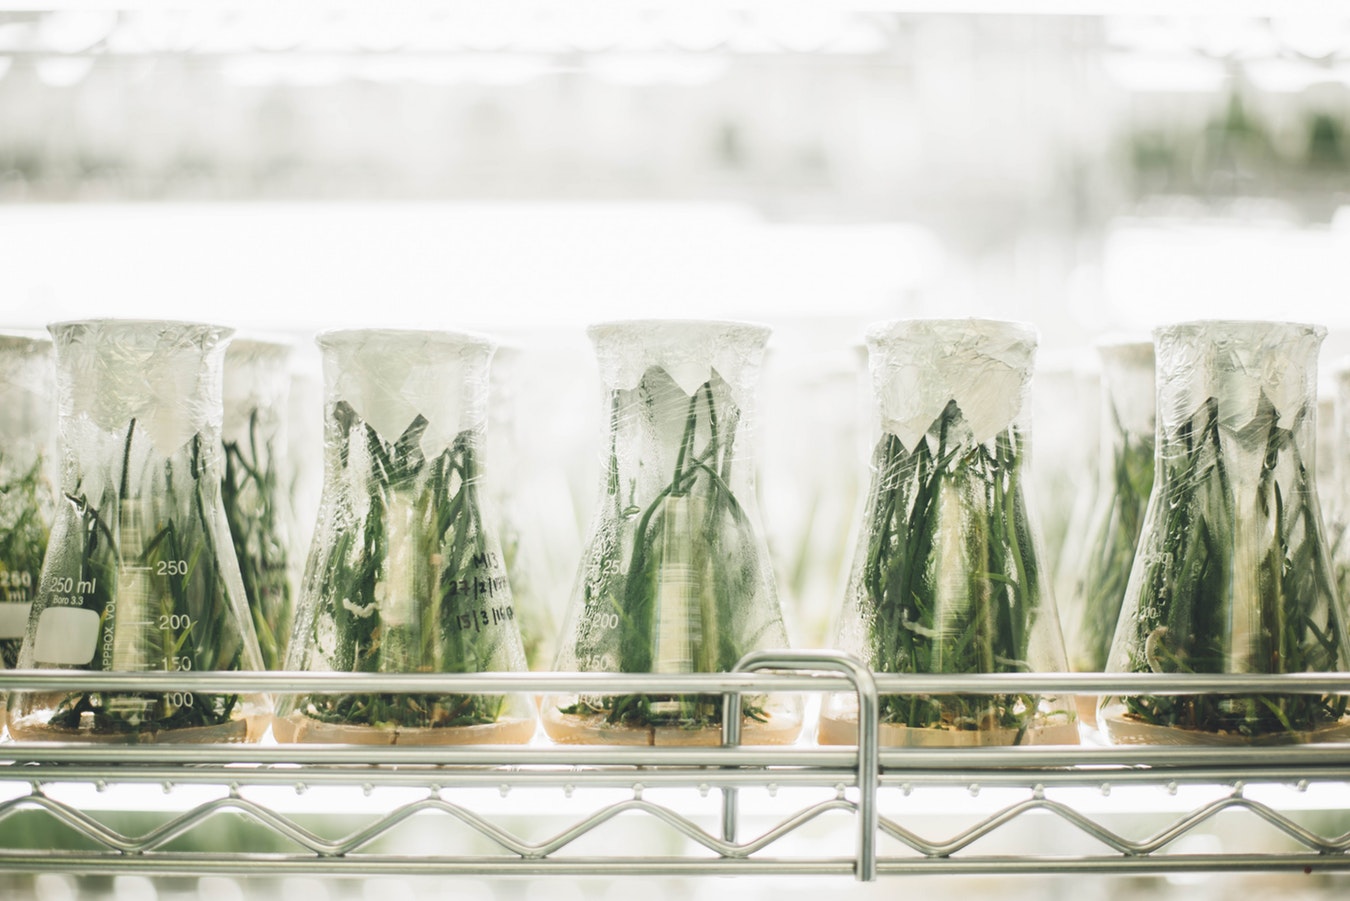 Green plants in large sealed beakers in a laboratory